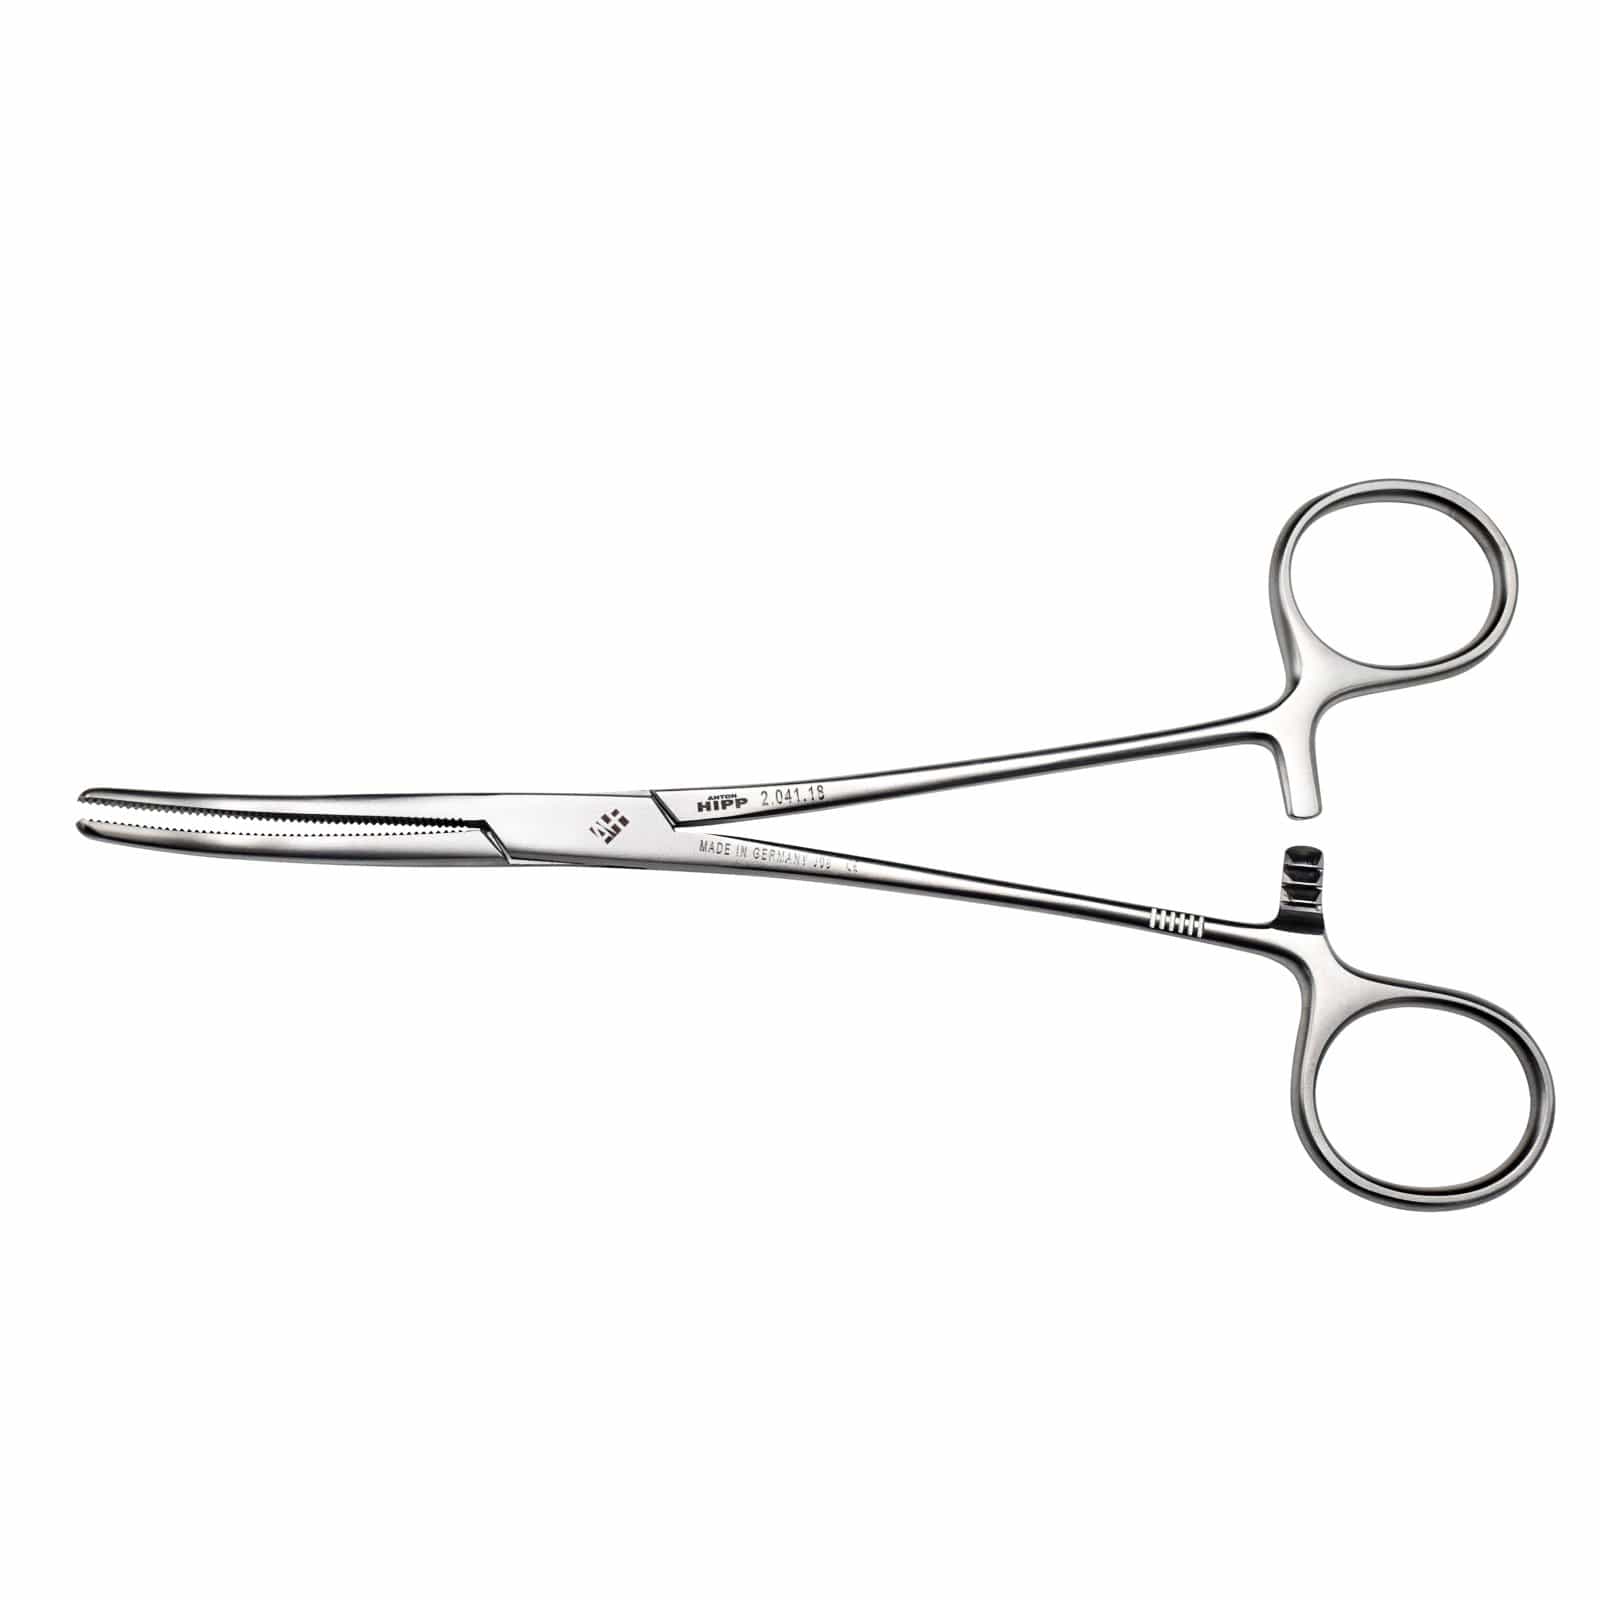 Hipp Surgical Instruments 18cm / Curved Hipp Crile Artery Forceps